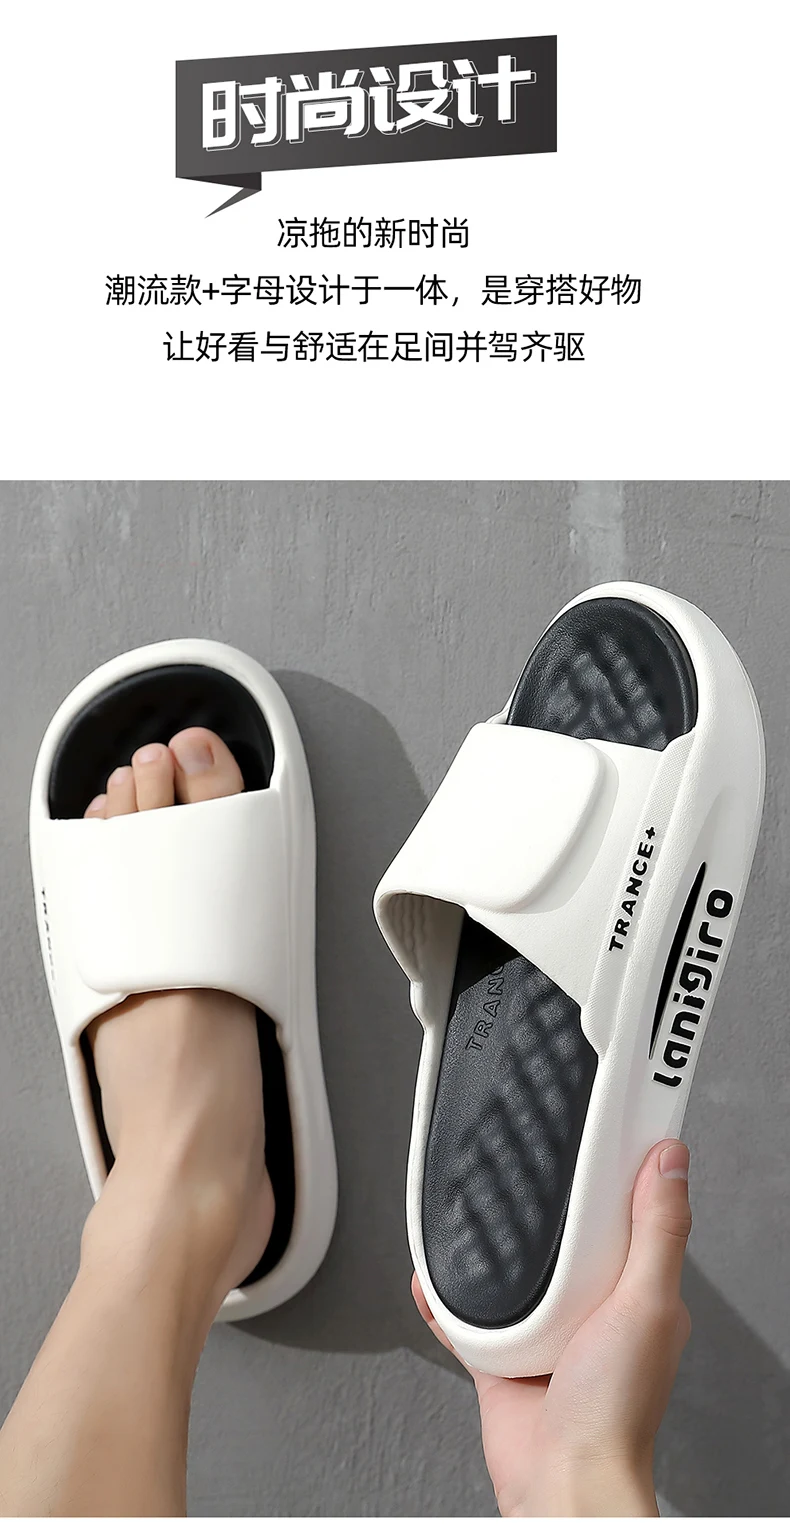 Summer Man Slippers Flip Flops 2022 New Solid Sandals Men Fashion Outside Thick Non-slip Sole Bathroom Casual Beach Home Slipper